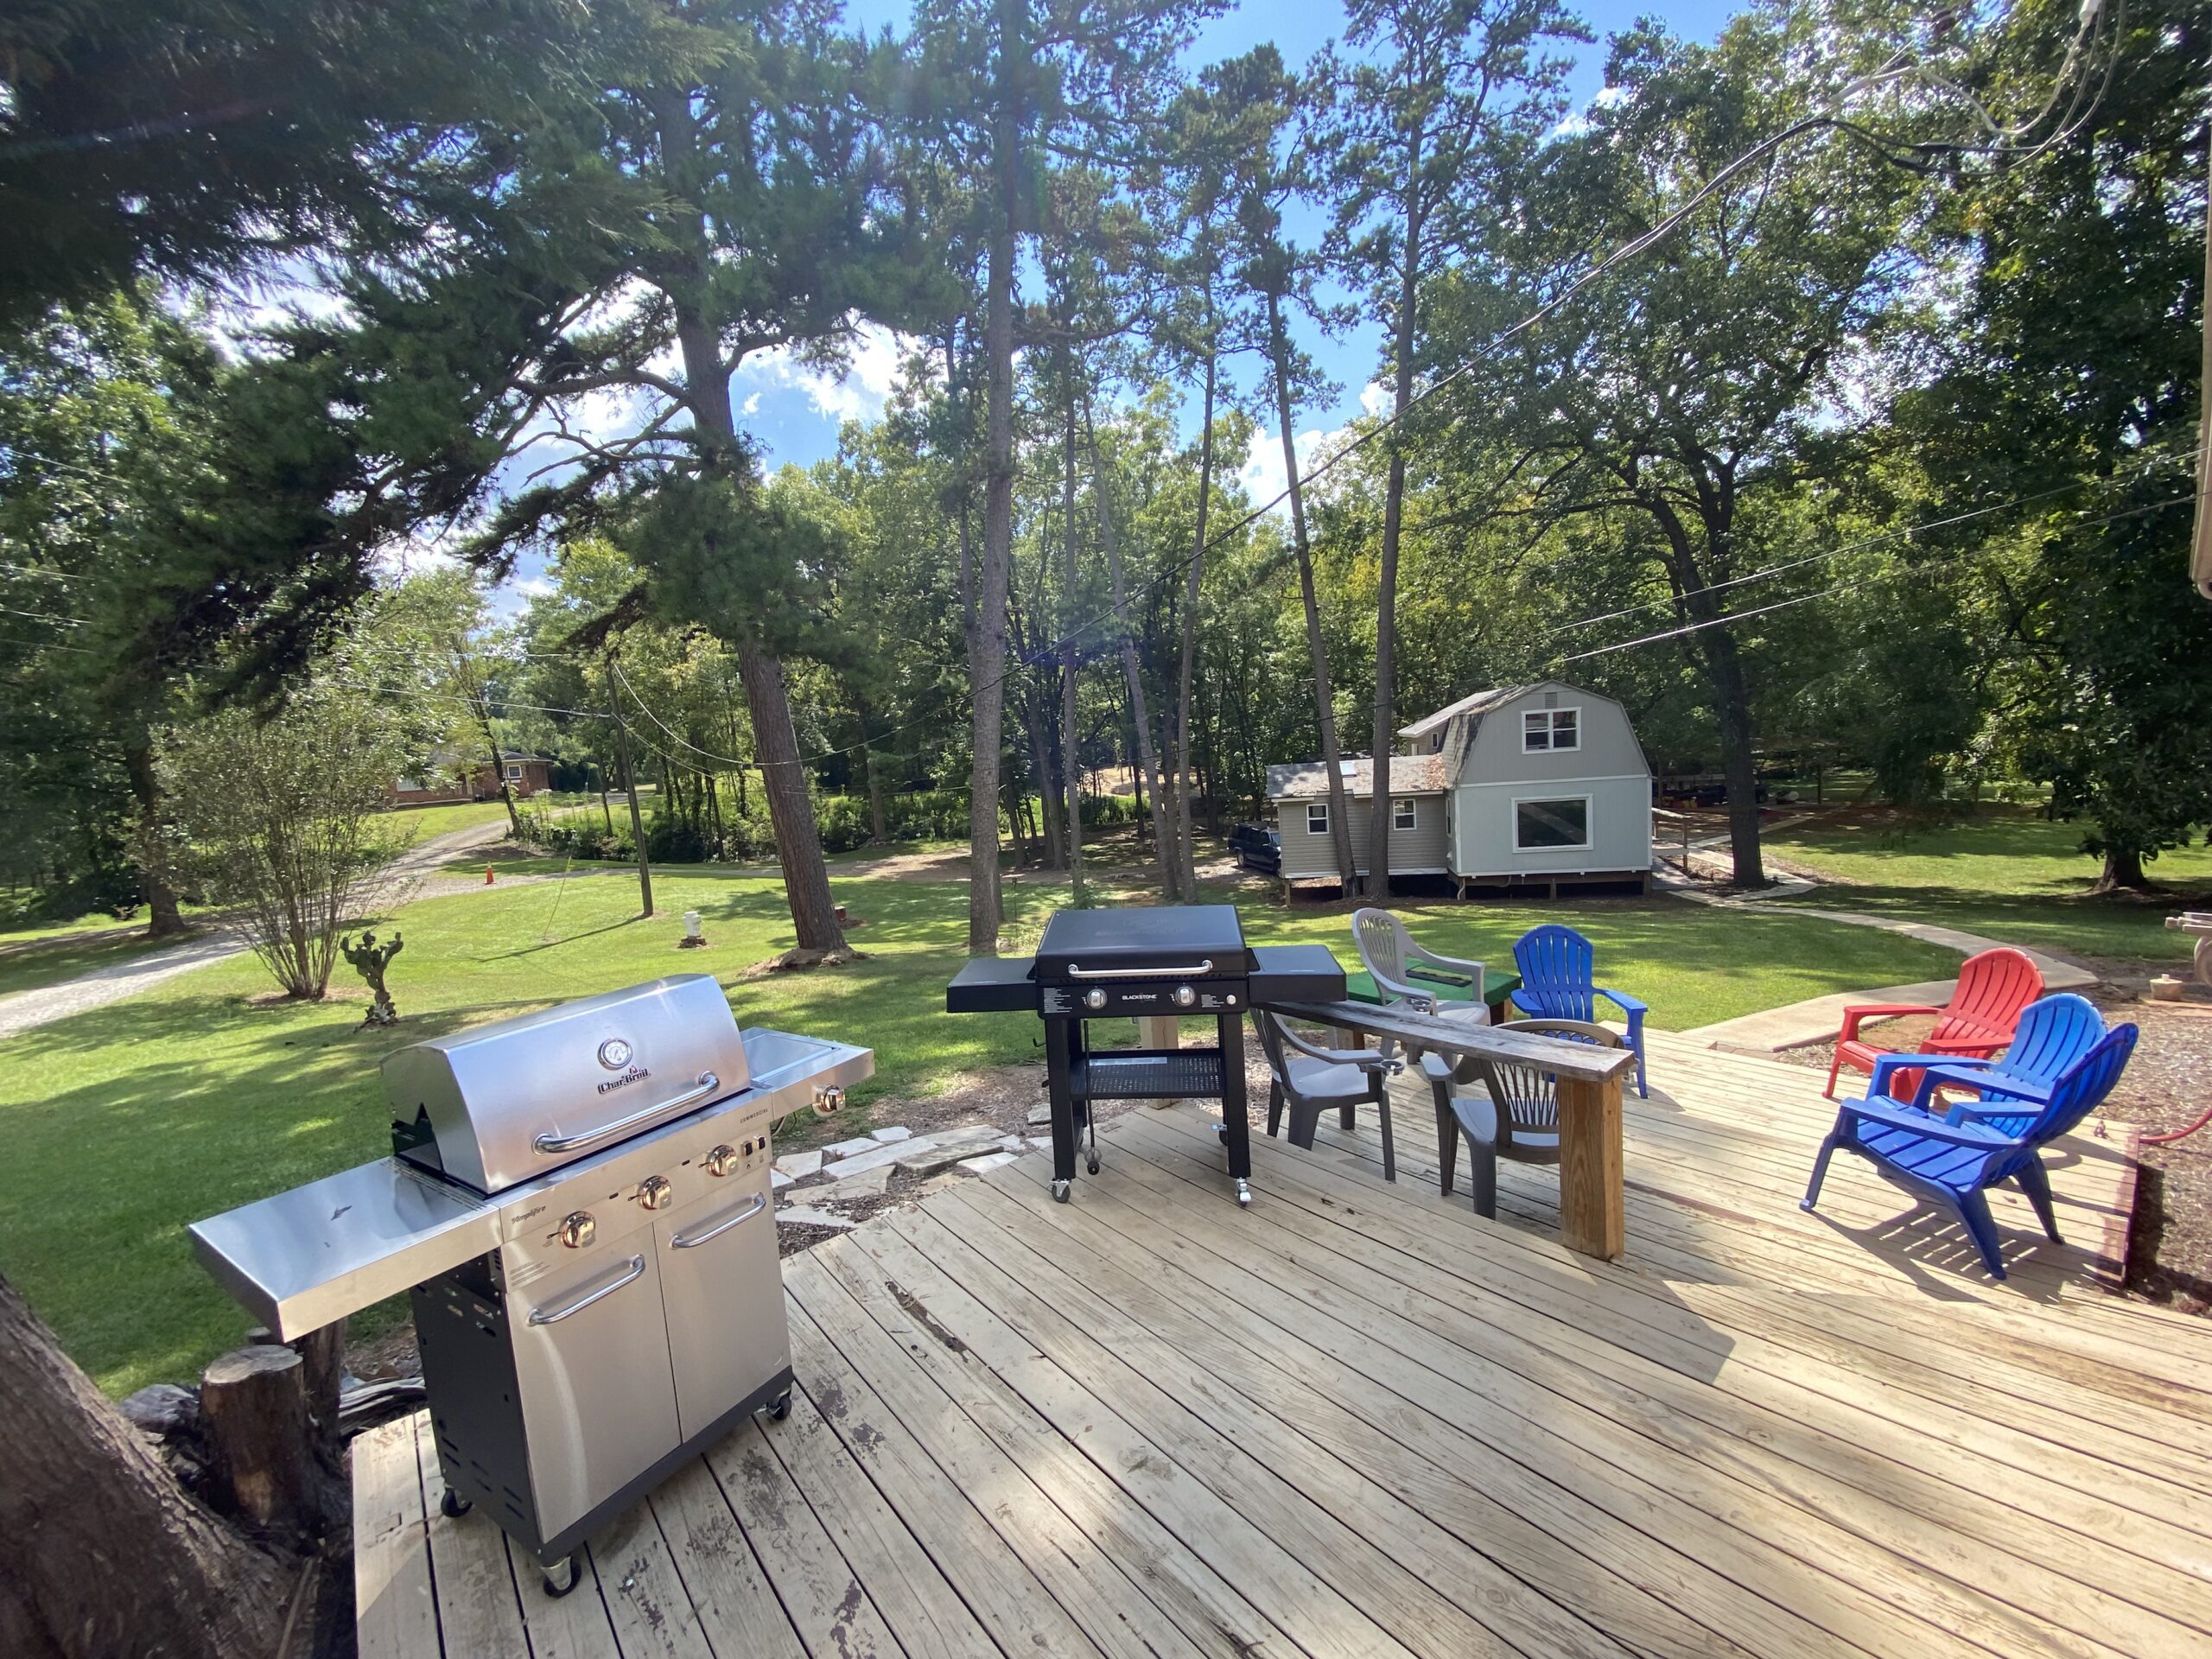 faith based recovery programs for men north carolina grilling station